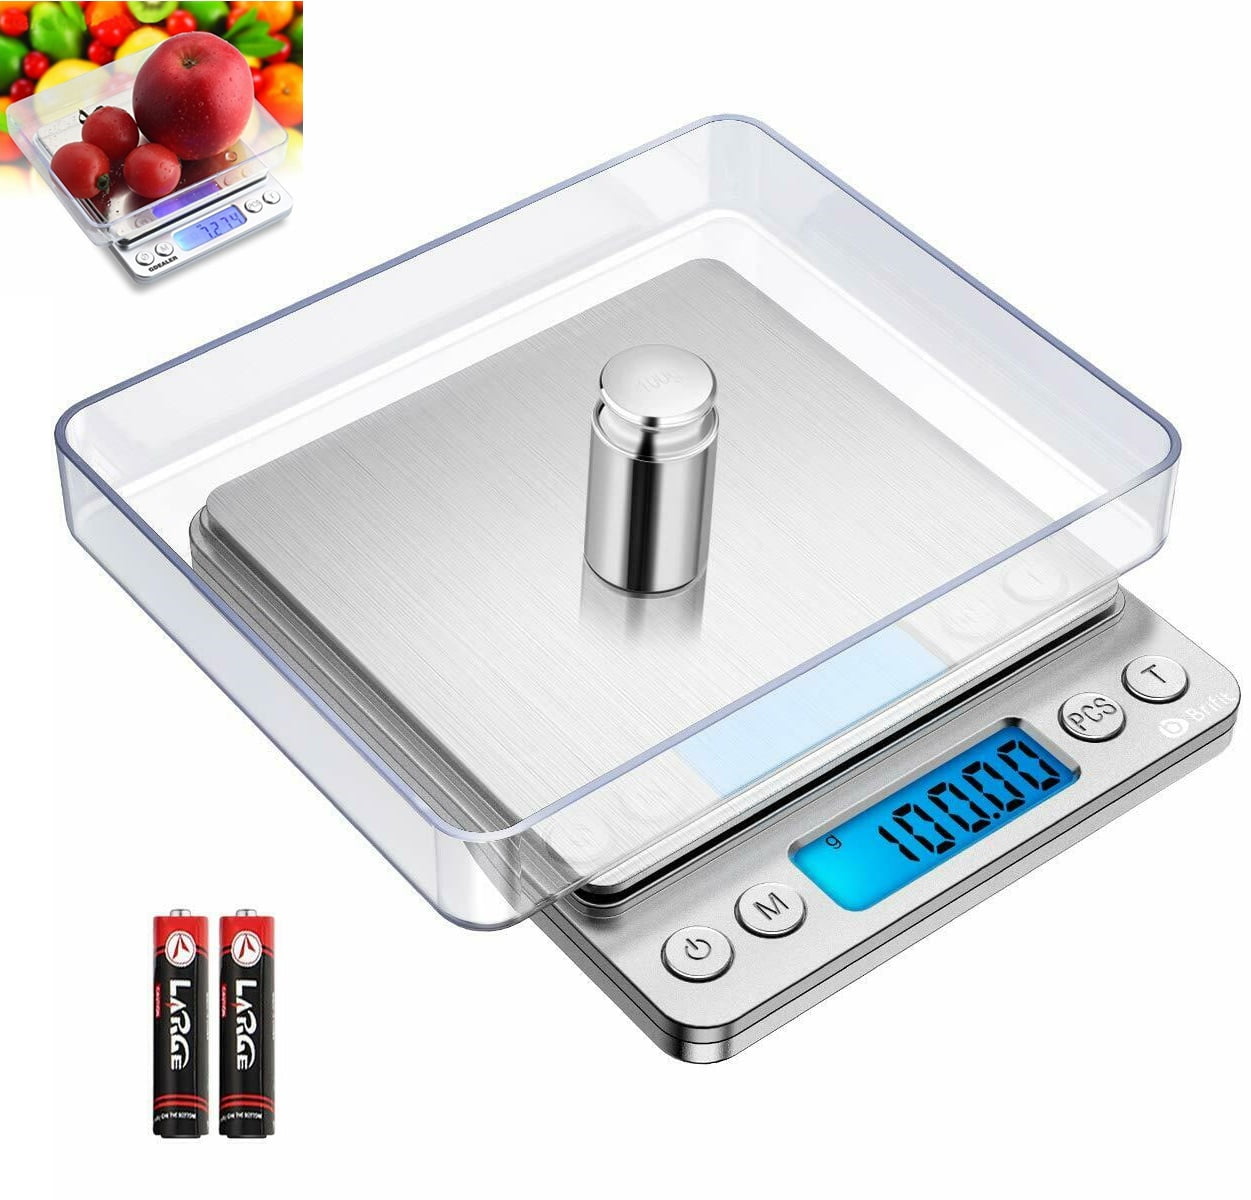 Digital Food Kitchen Scale, Multifunction Scale Measures in Grams and Ounces 2 Trays, 6 Units